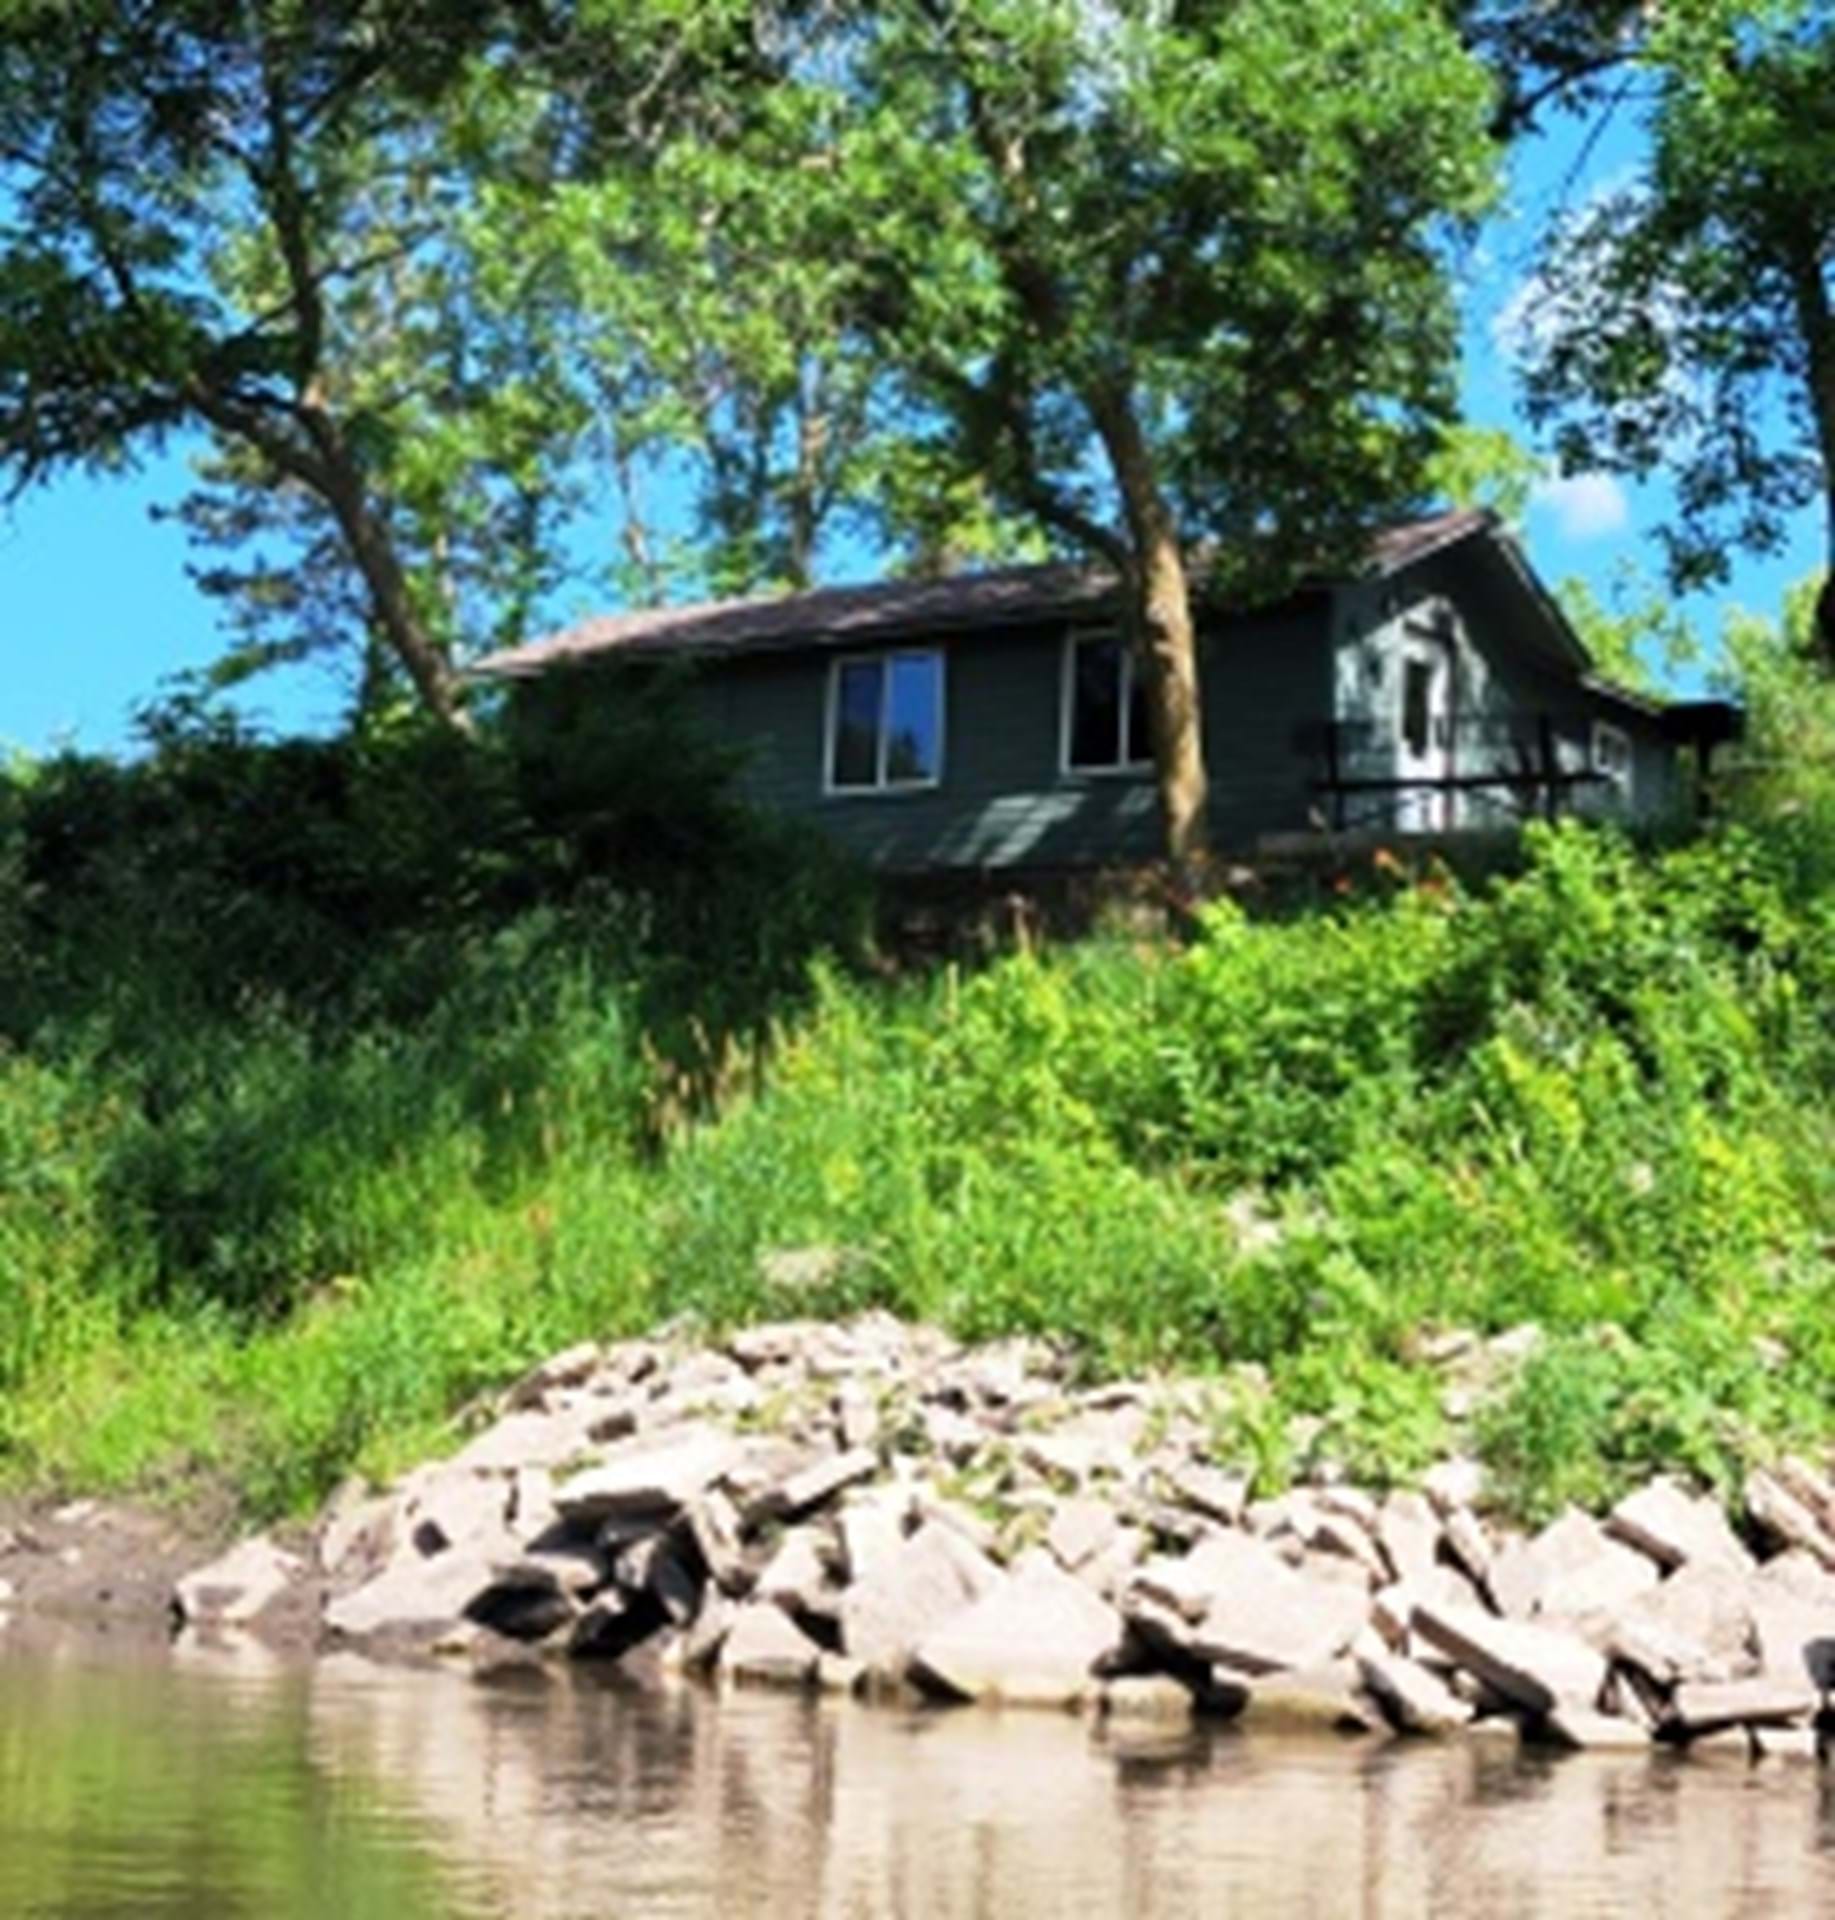 View of Cabin from River